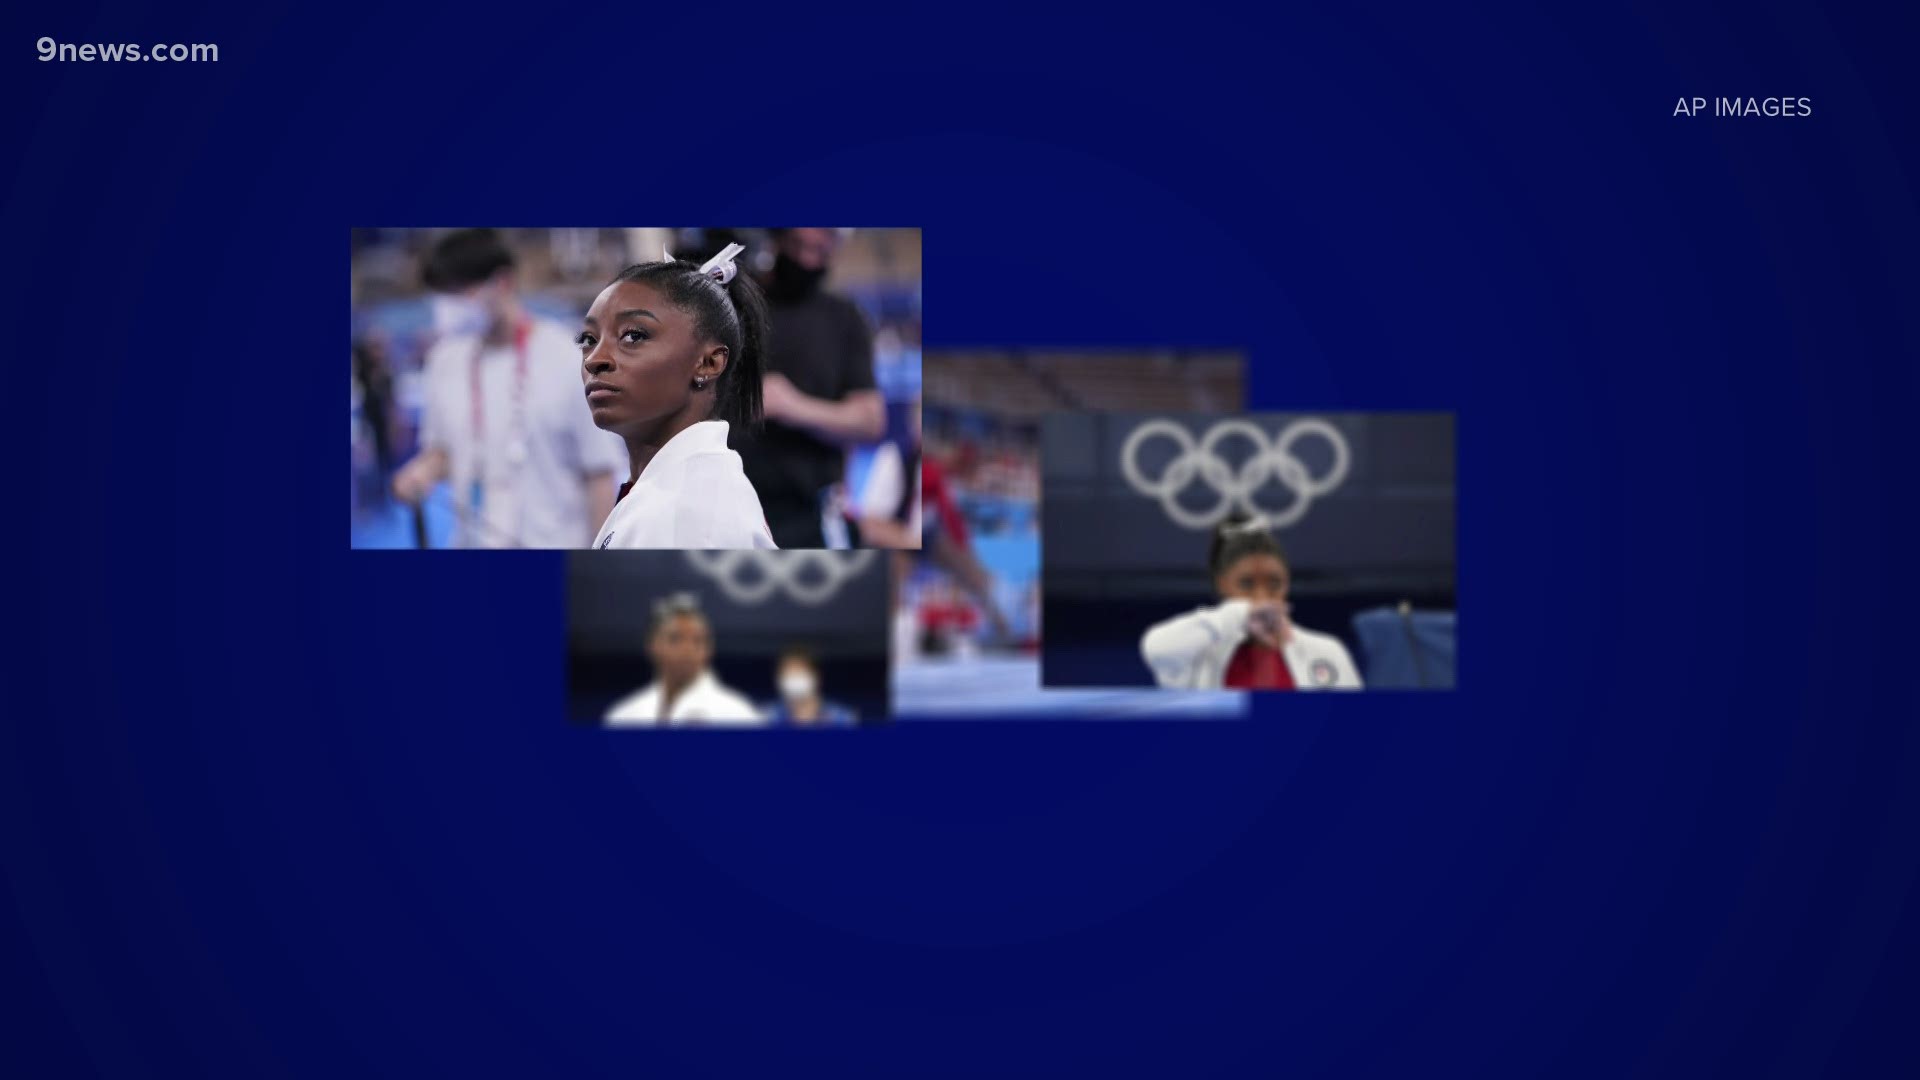 Dr. Rick Perea said he isn't surprised Simone Biles took herself out of the team gymnastics competition.